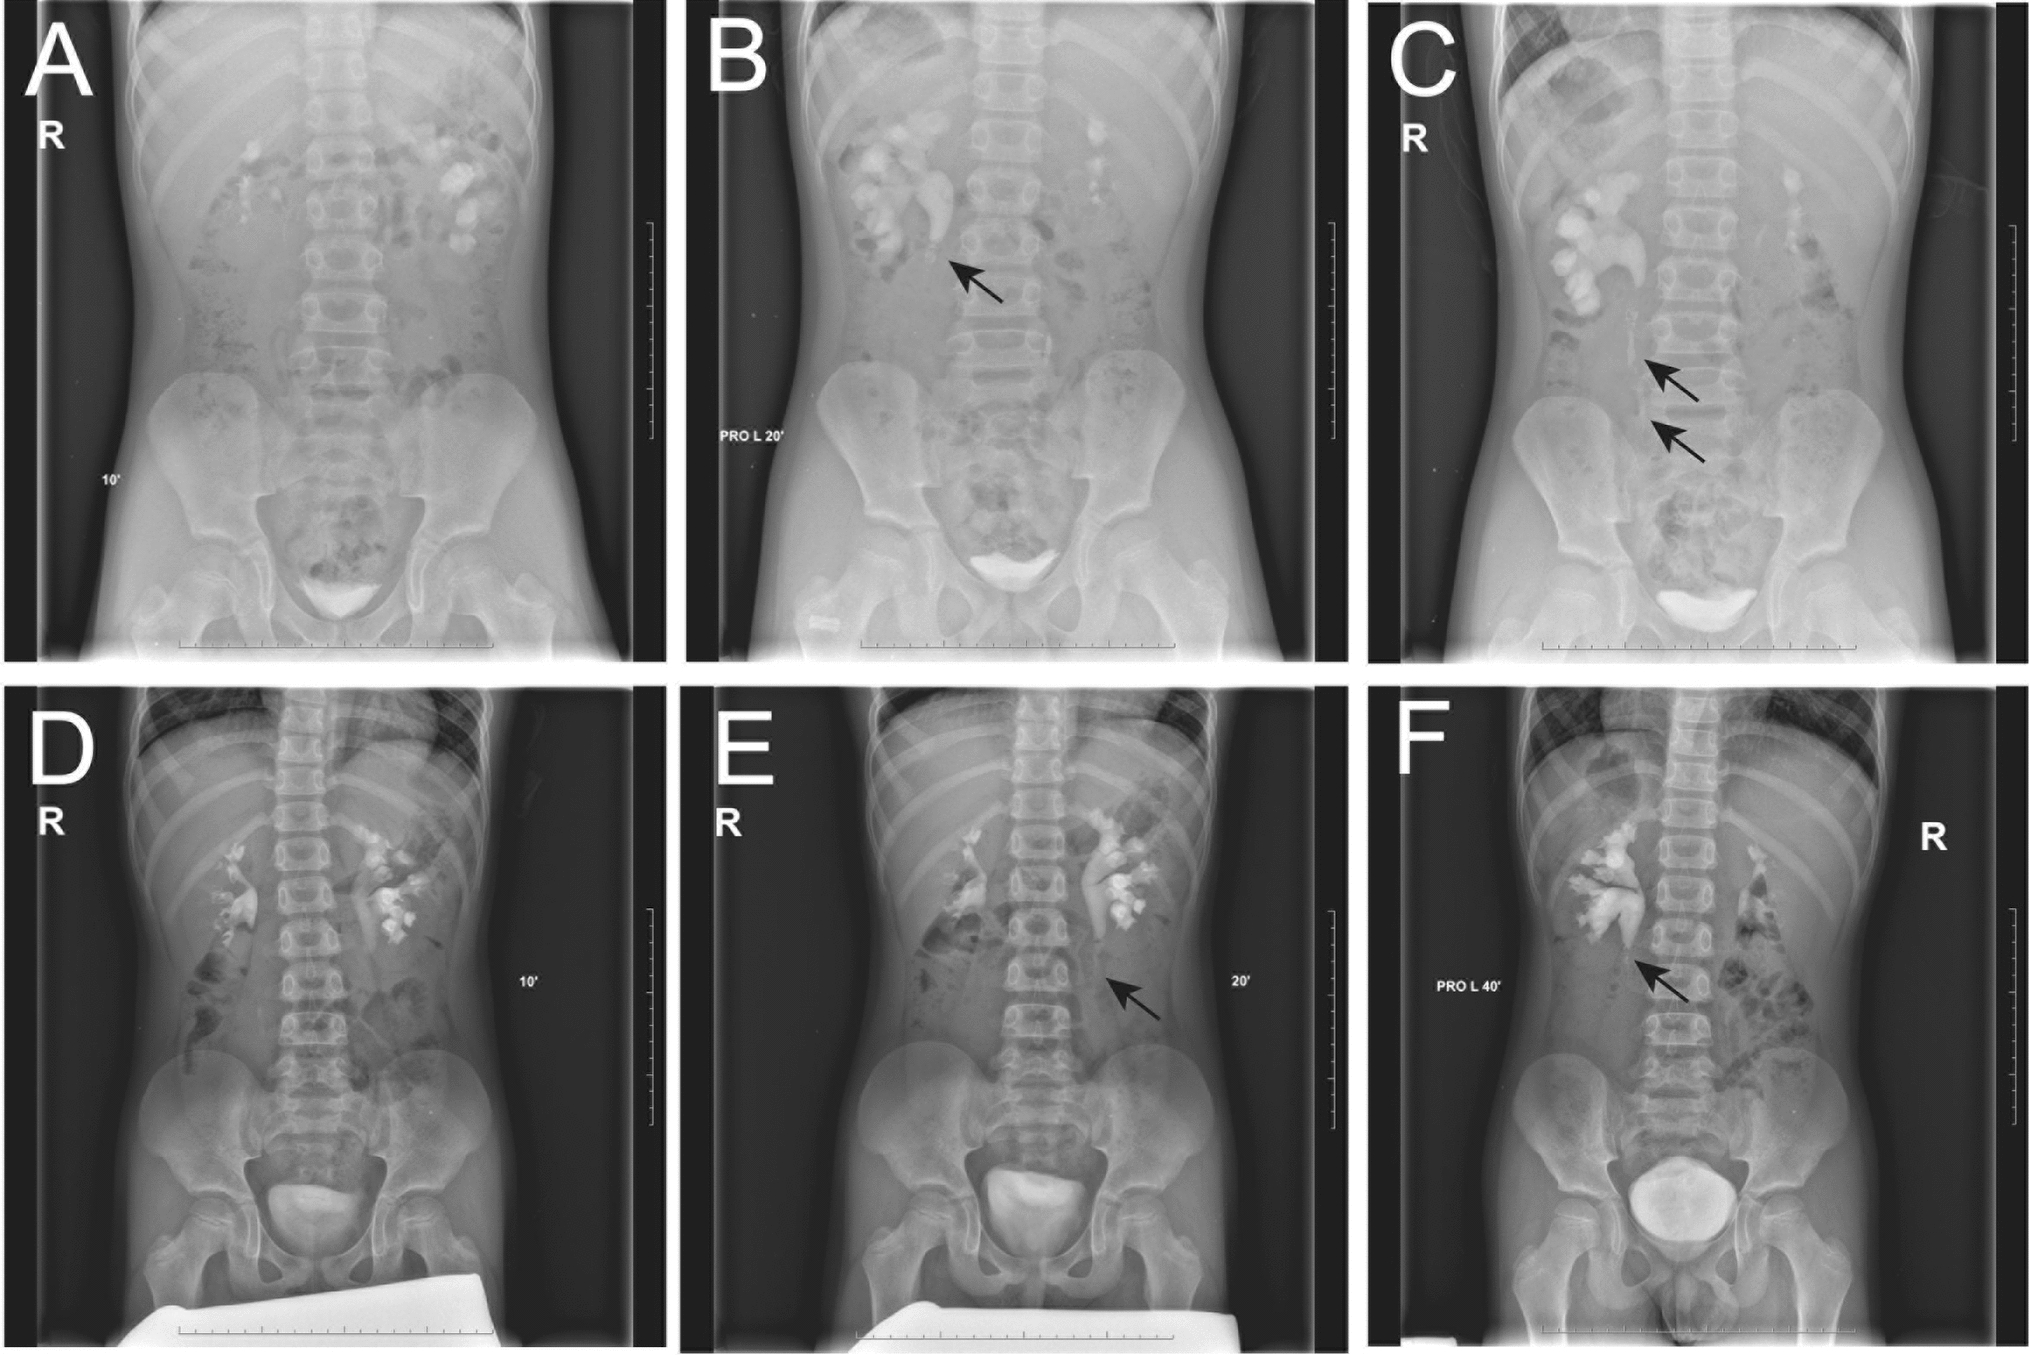 Ureteropelvic junction obstruction with polyps in children: clinical manifestations and supranormal preoperative differential renal function